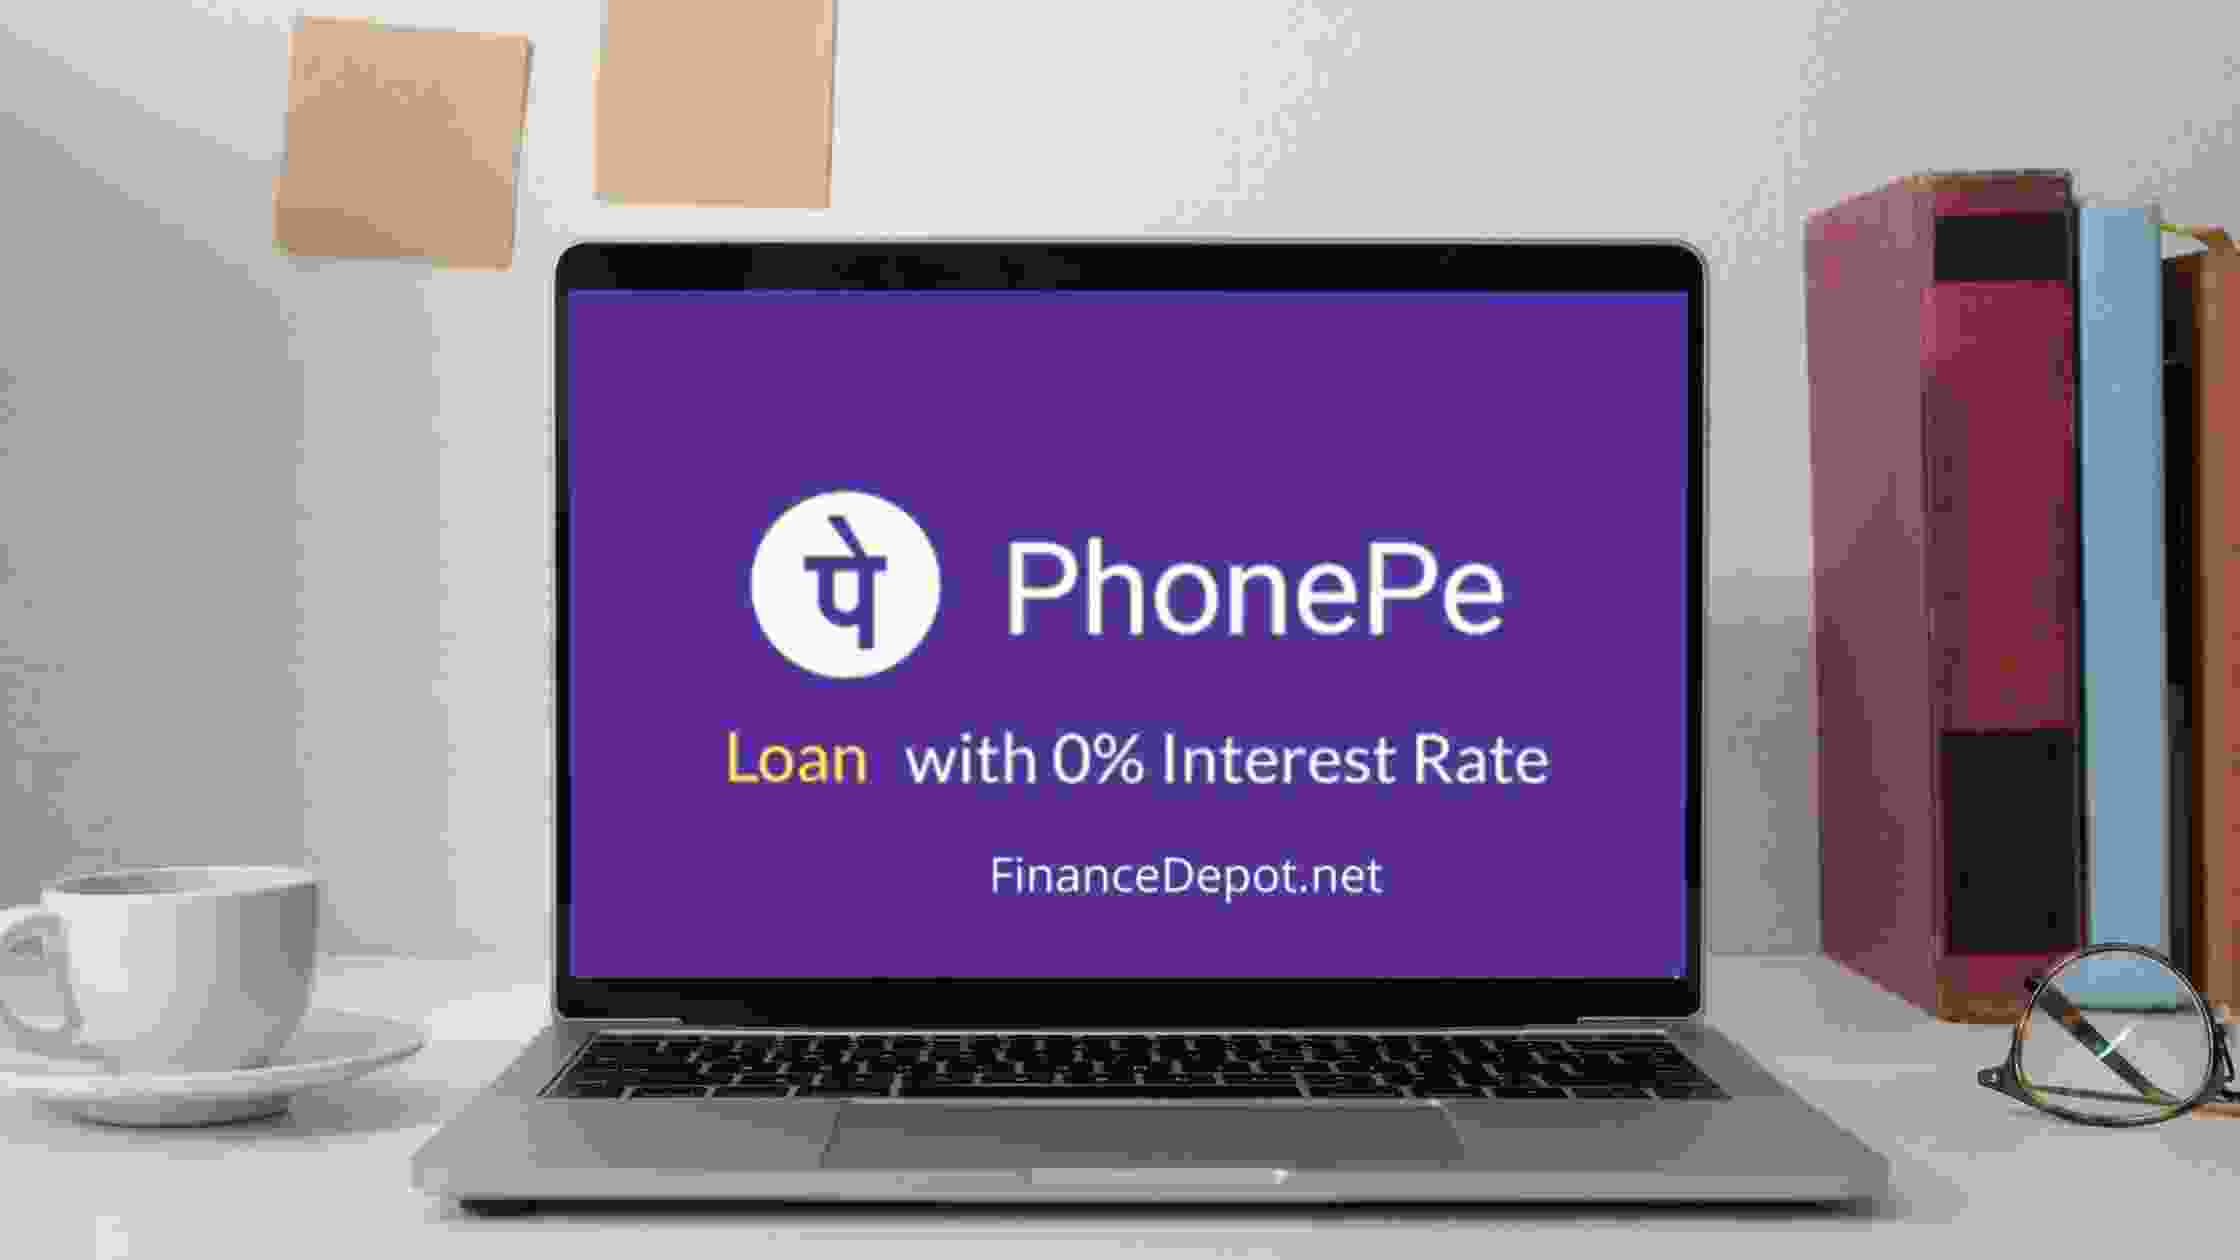 PhonePe Laon Application